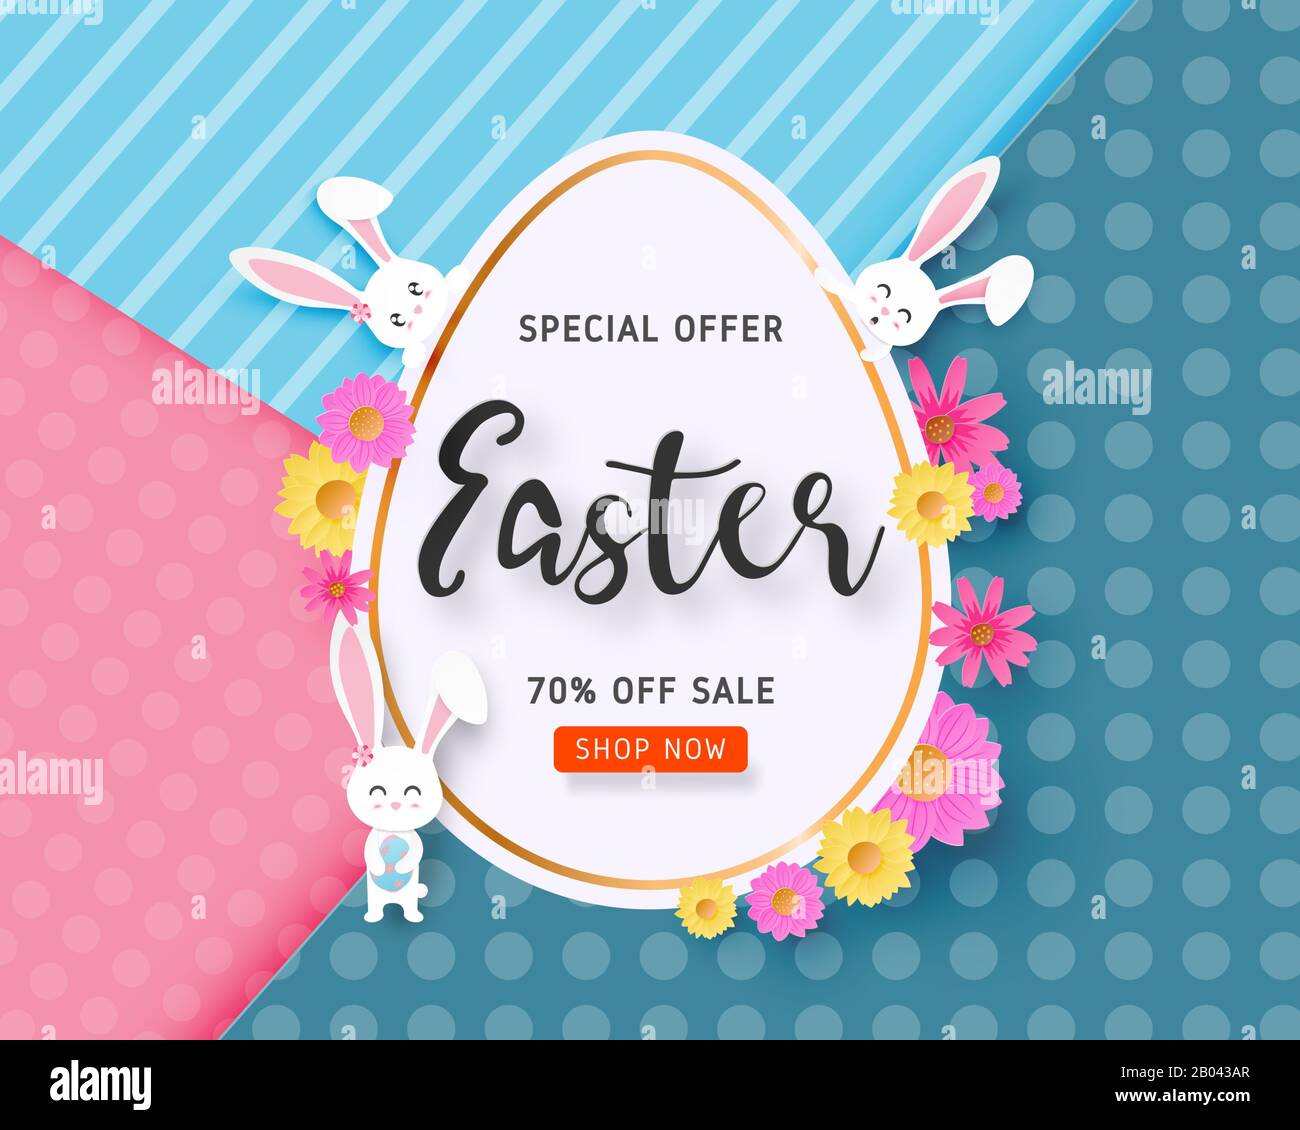 https://c8.alamy.com/comp/2B043AR/happy-easter-sale-banner-with-easter-egg-bunny-and-flower-on-background-in-paper-cut-style-vector-illustration-poster-banner-flyer-backdrop-bro-2B043AR.jpg